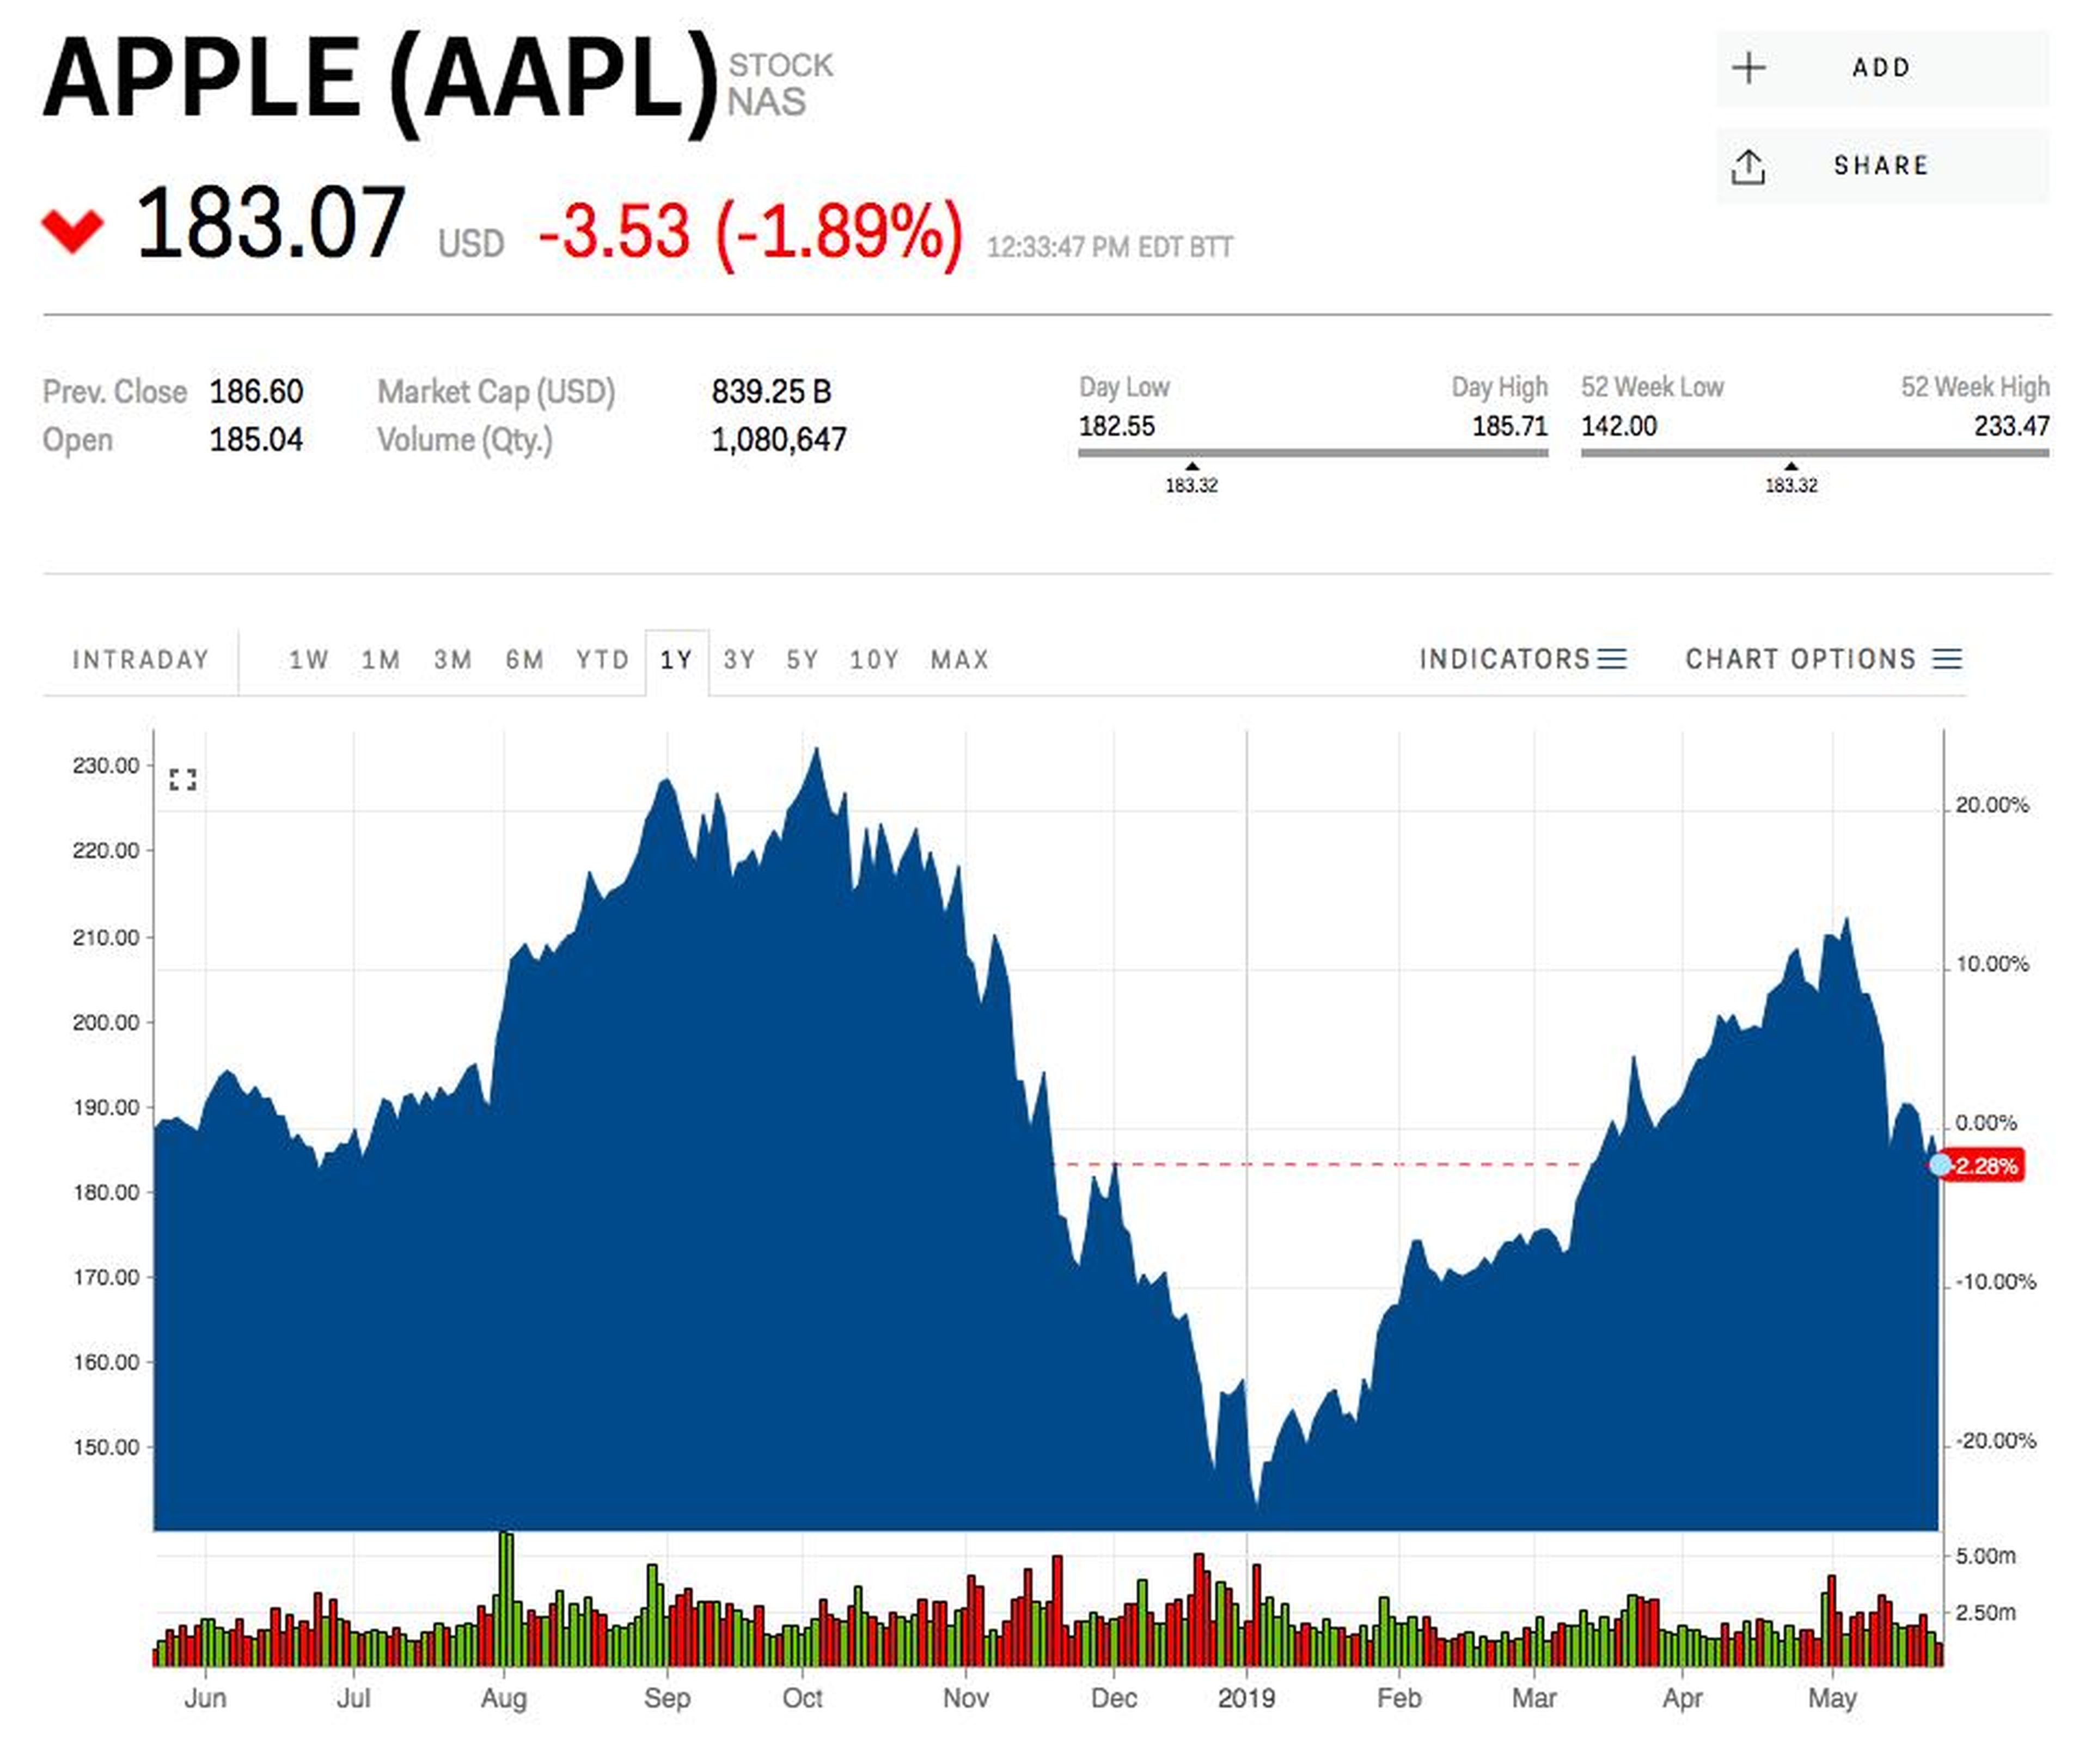 Apple's profit will drop by almost 30% if China bans its products, Goldman Sachs estimates